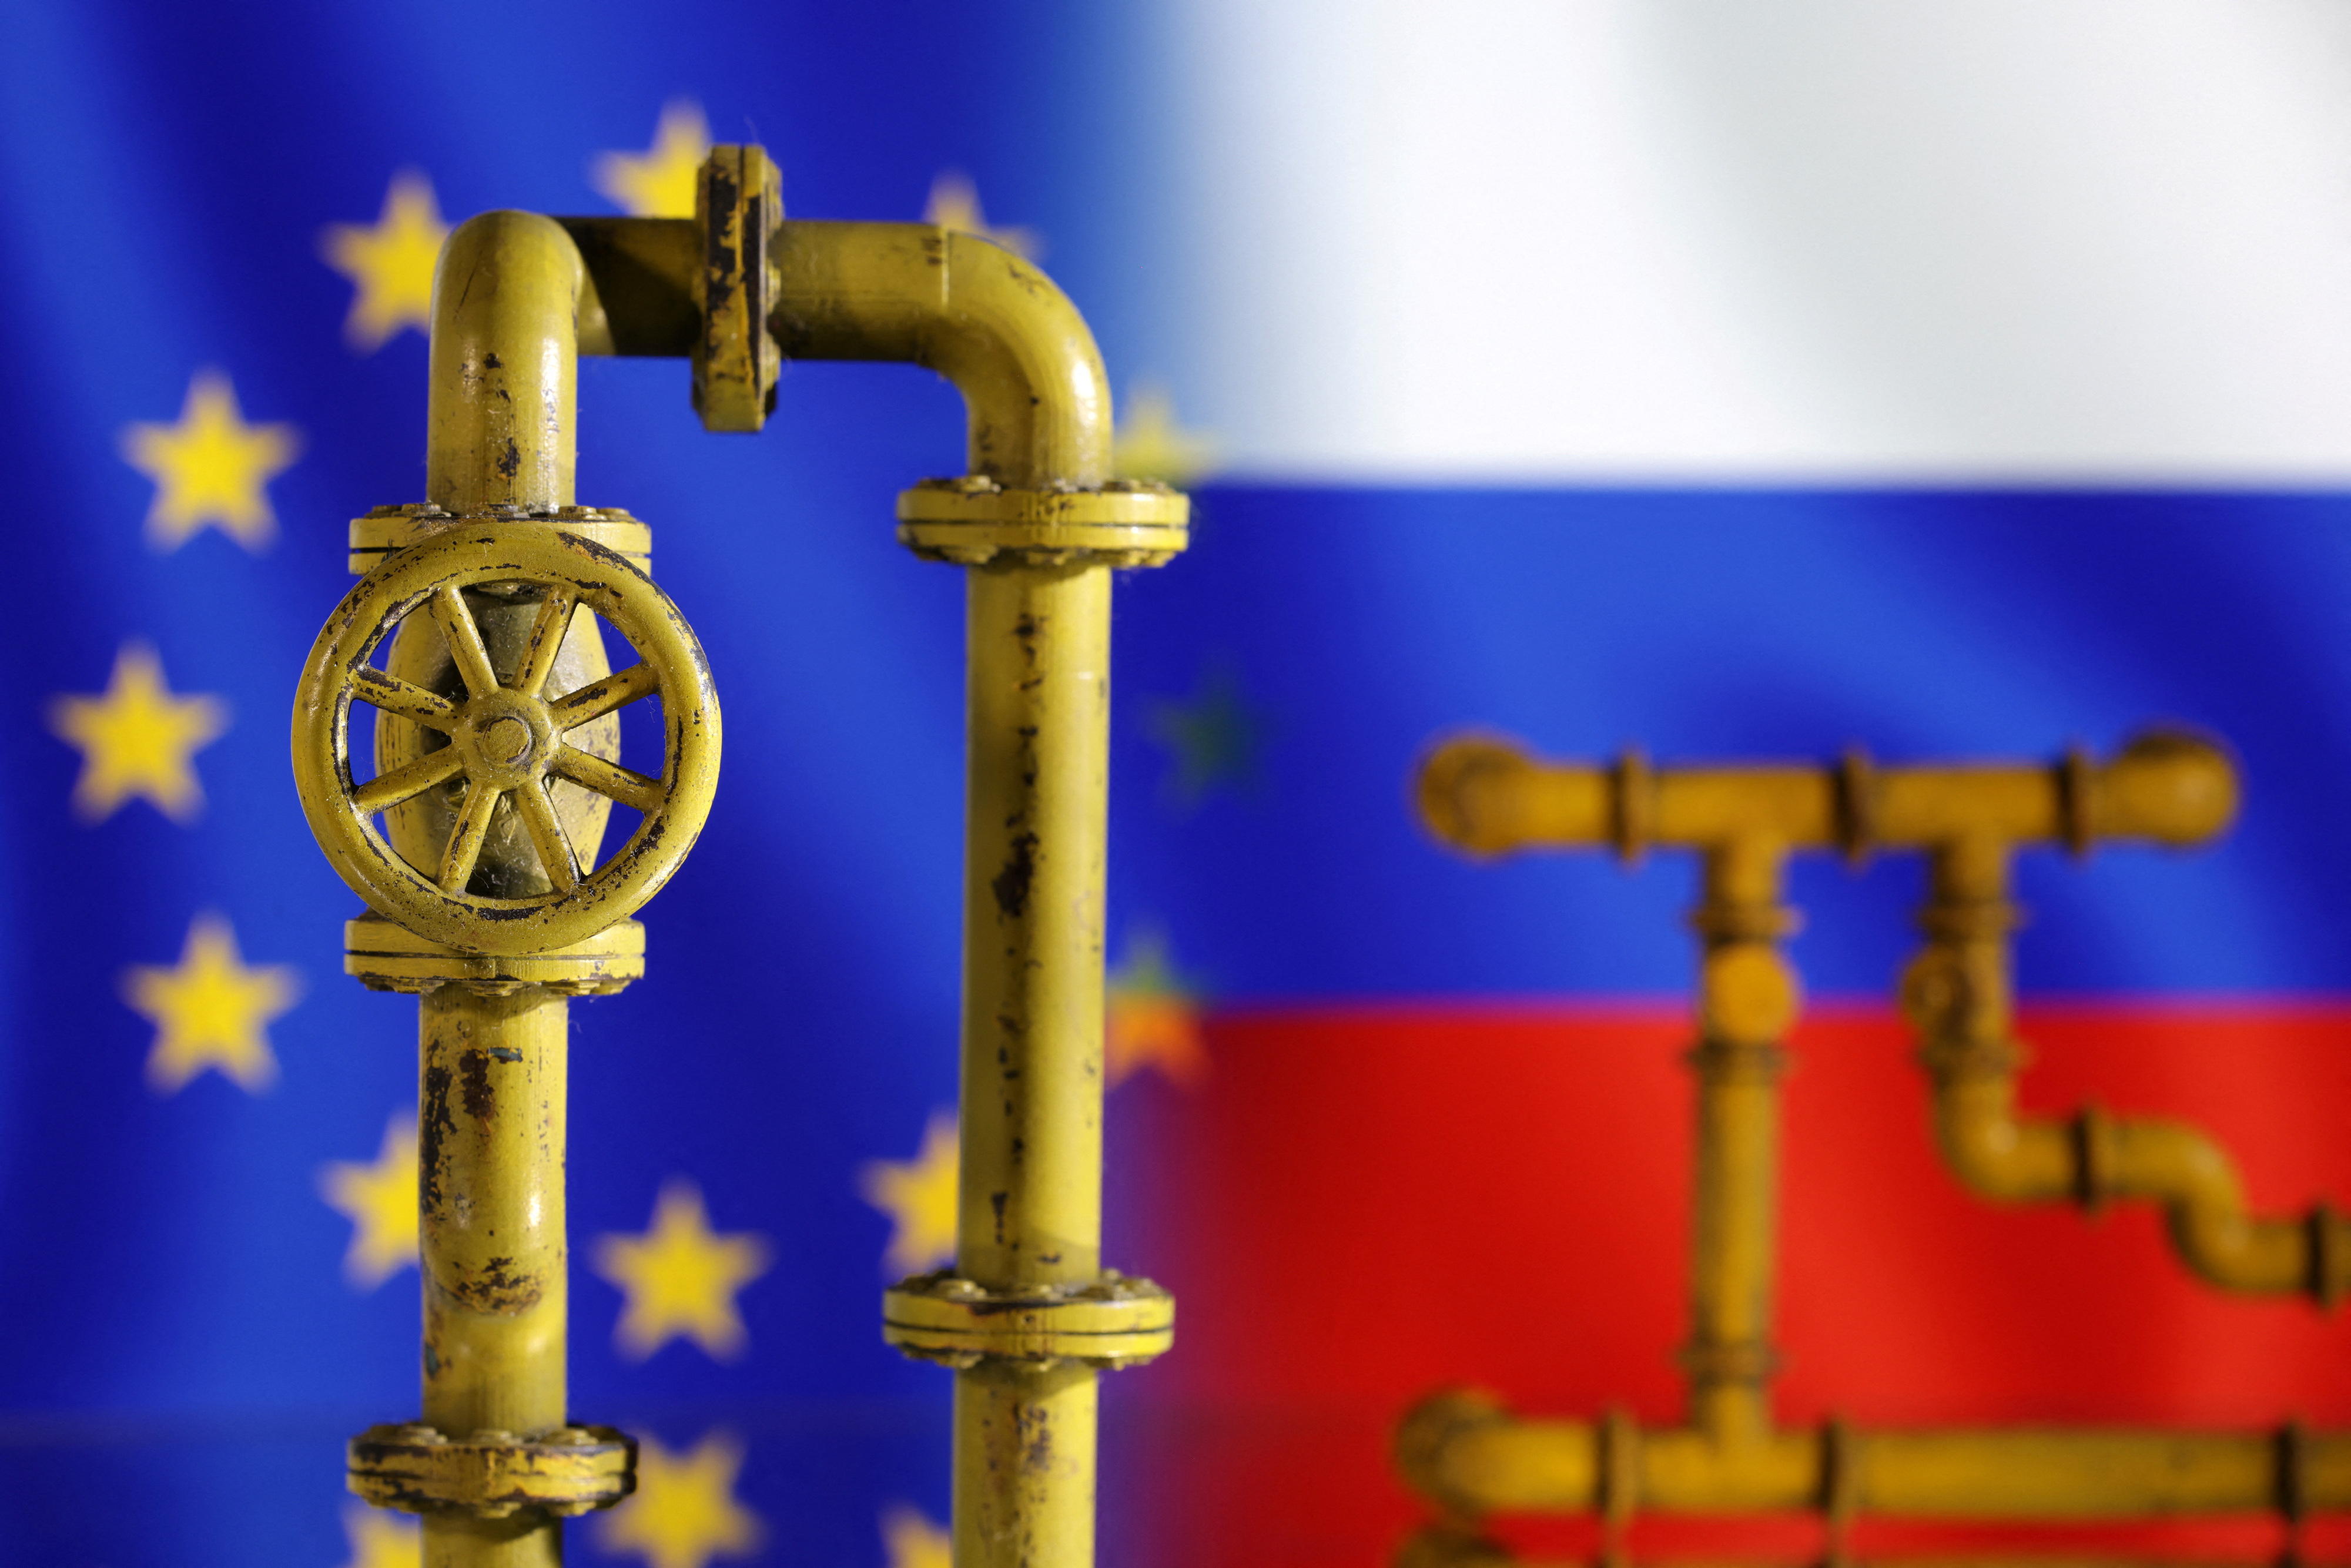  natural gas pipeline, EU and Russia flags